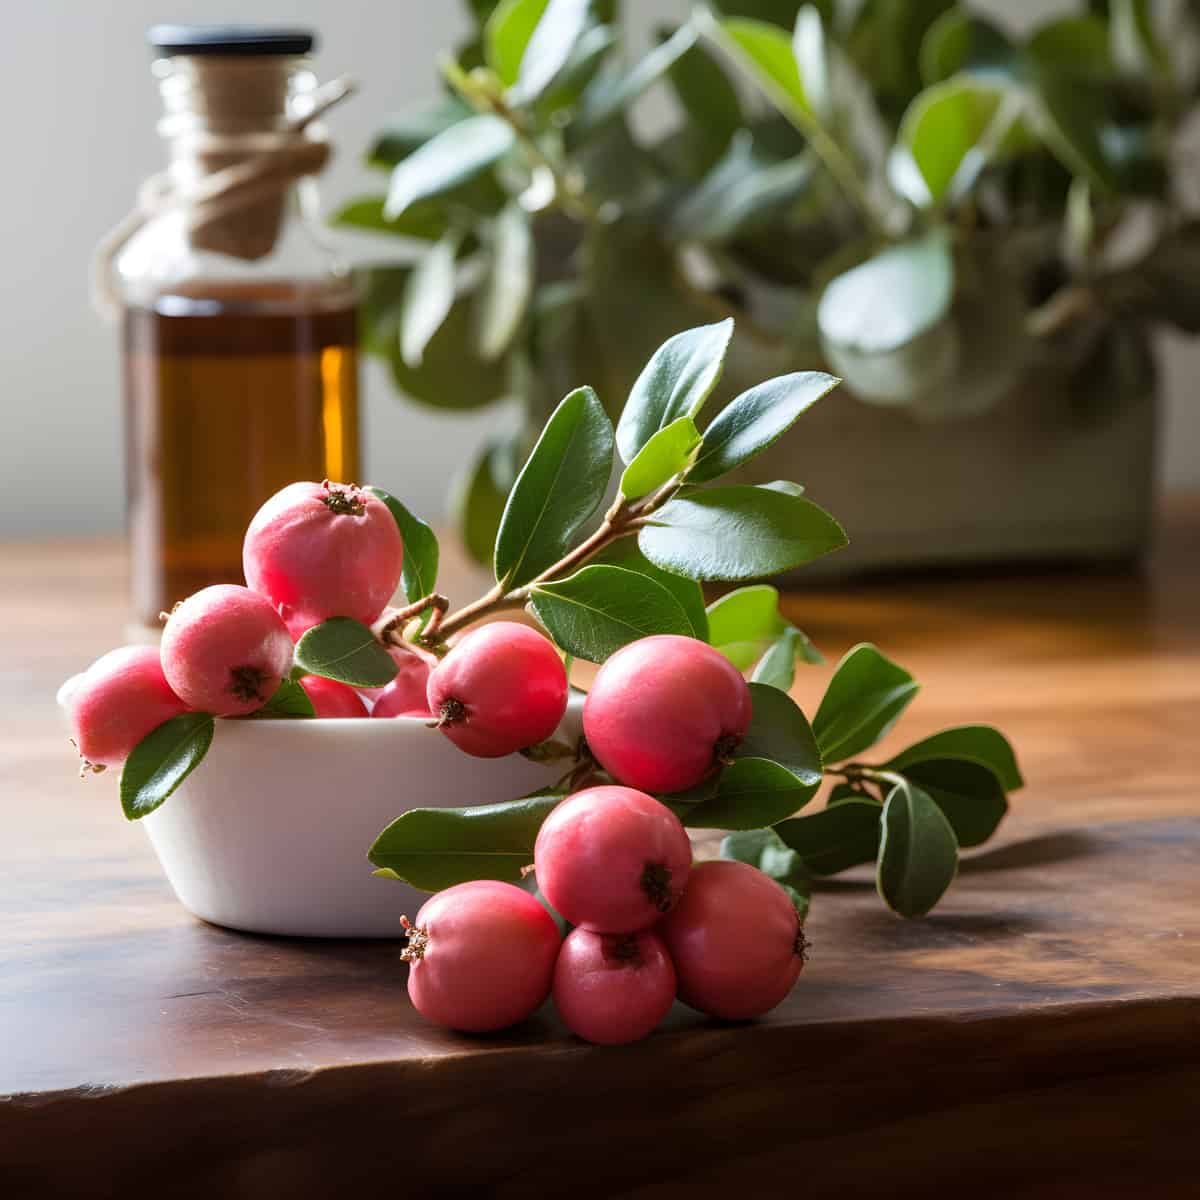 Chilean Guava on a kitchen counter